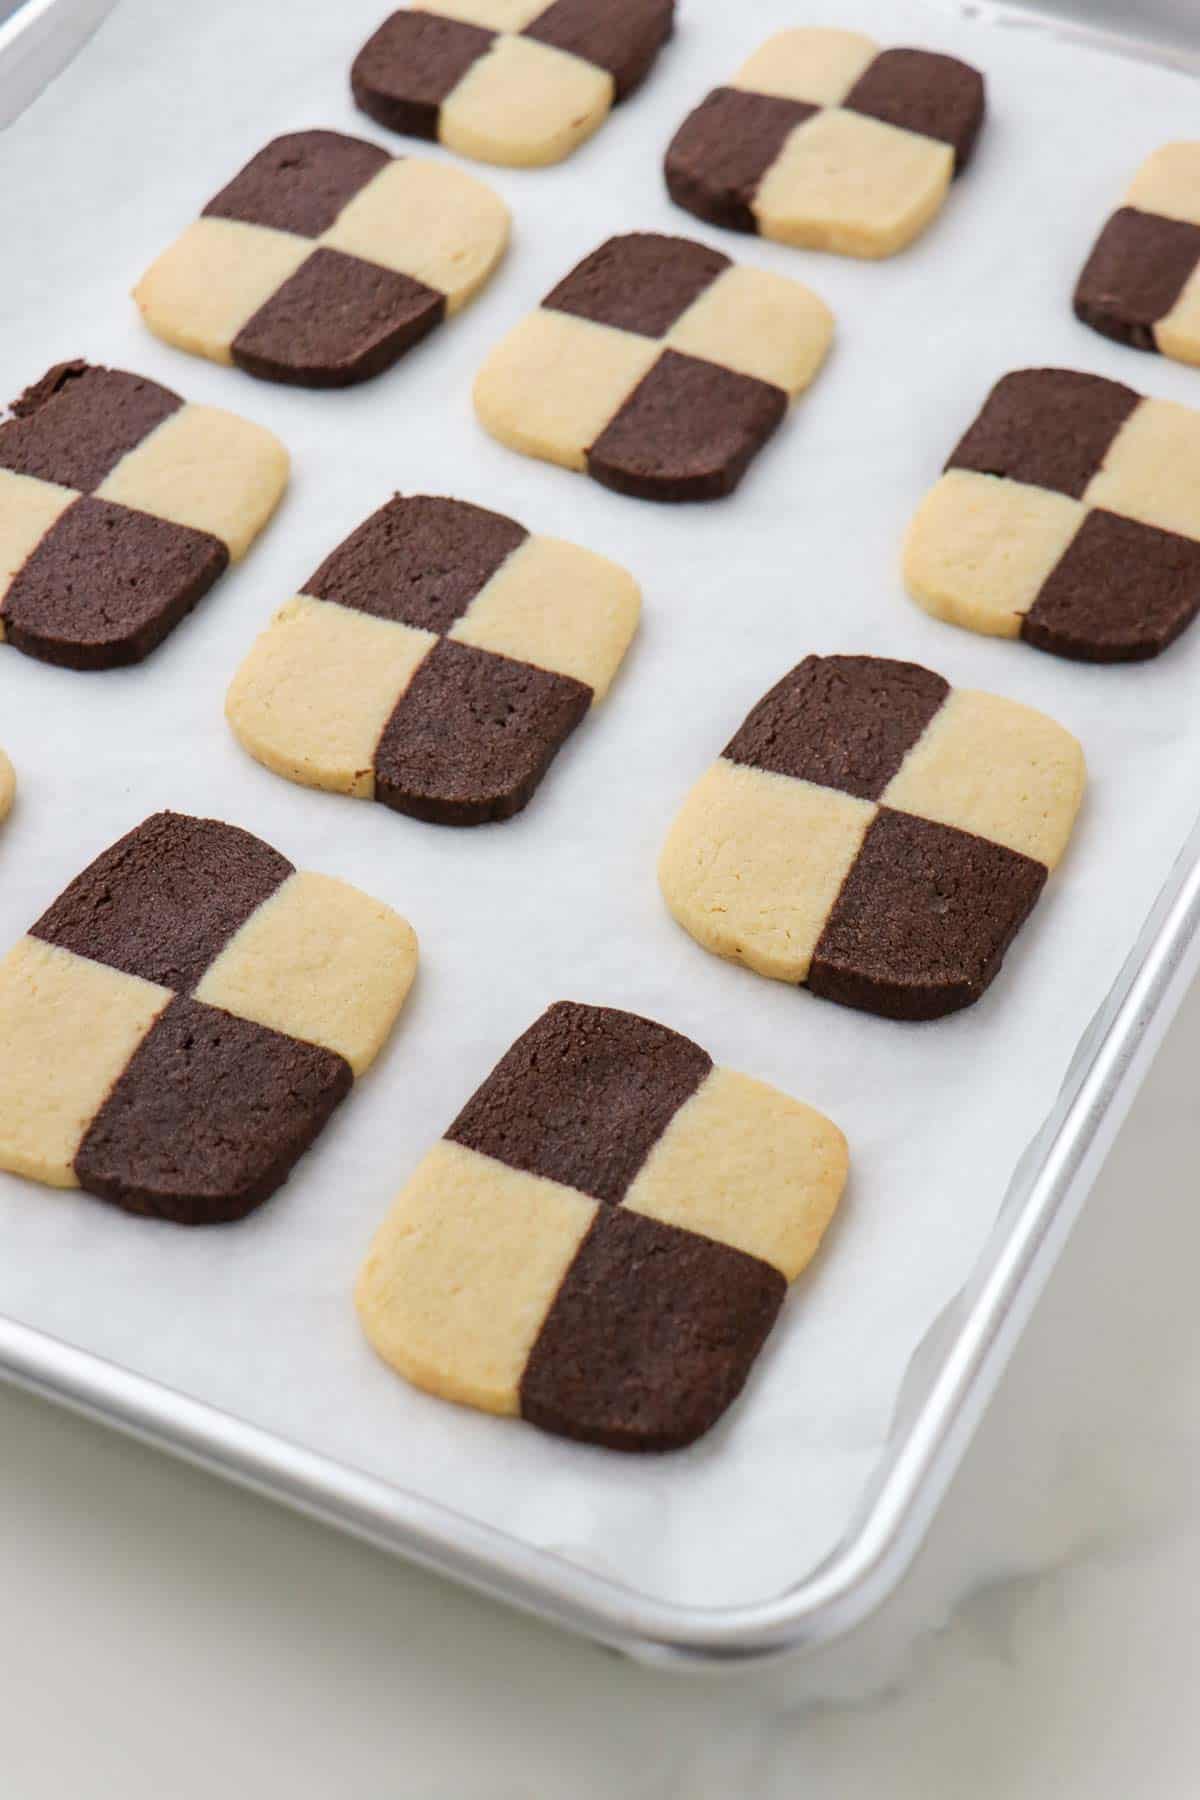 Baked Checkerboard Cookies on a baking sheet.